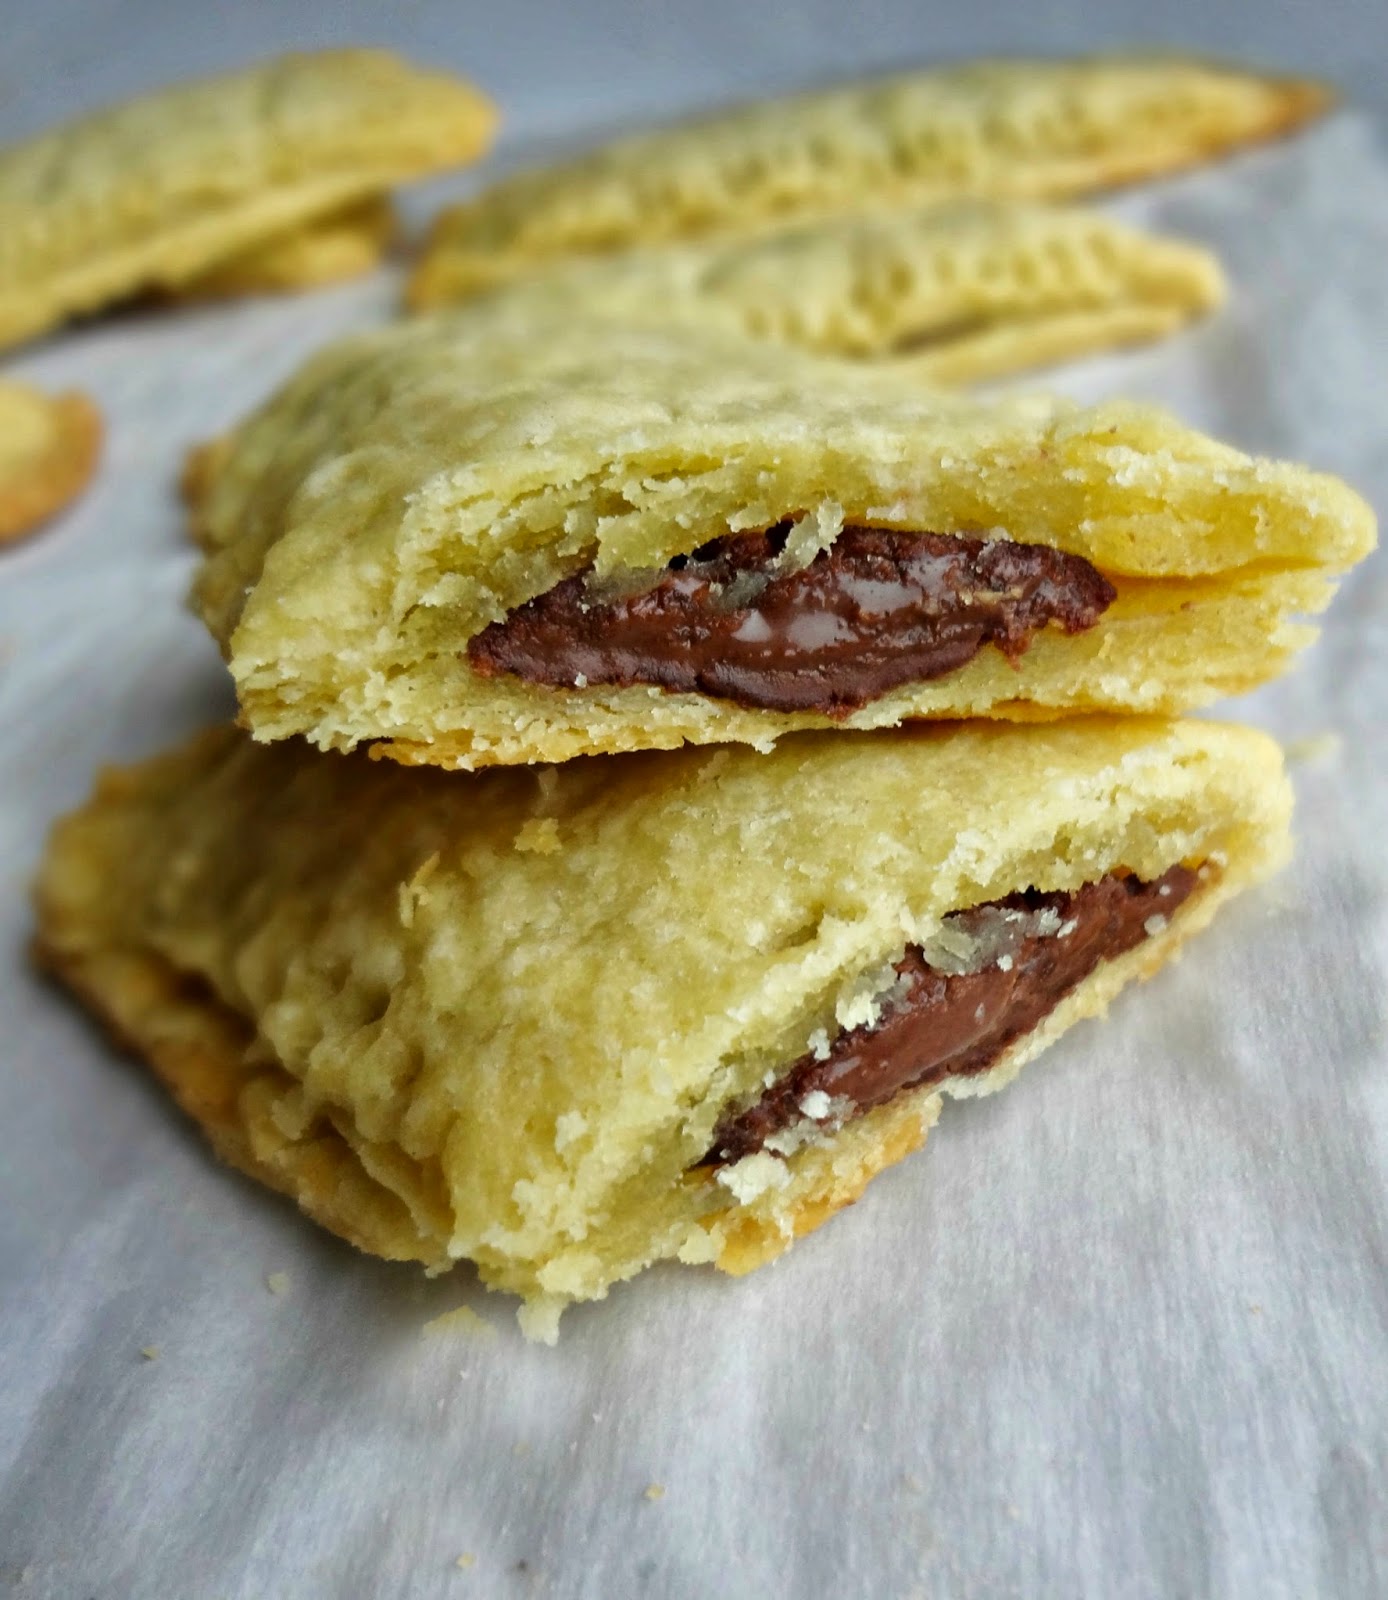 Chocolate Peanut Butter Breakfast Pastries